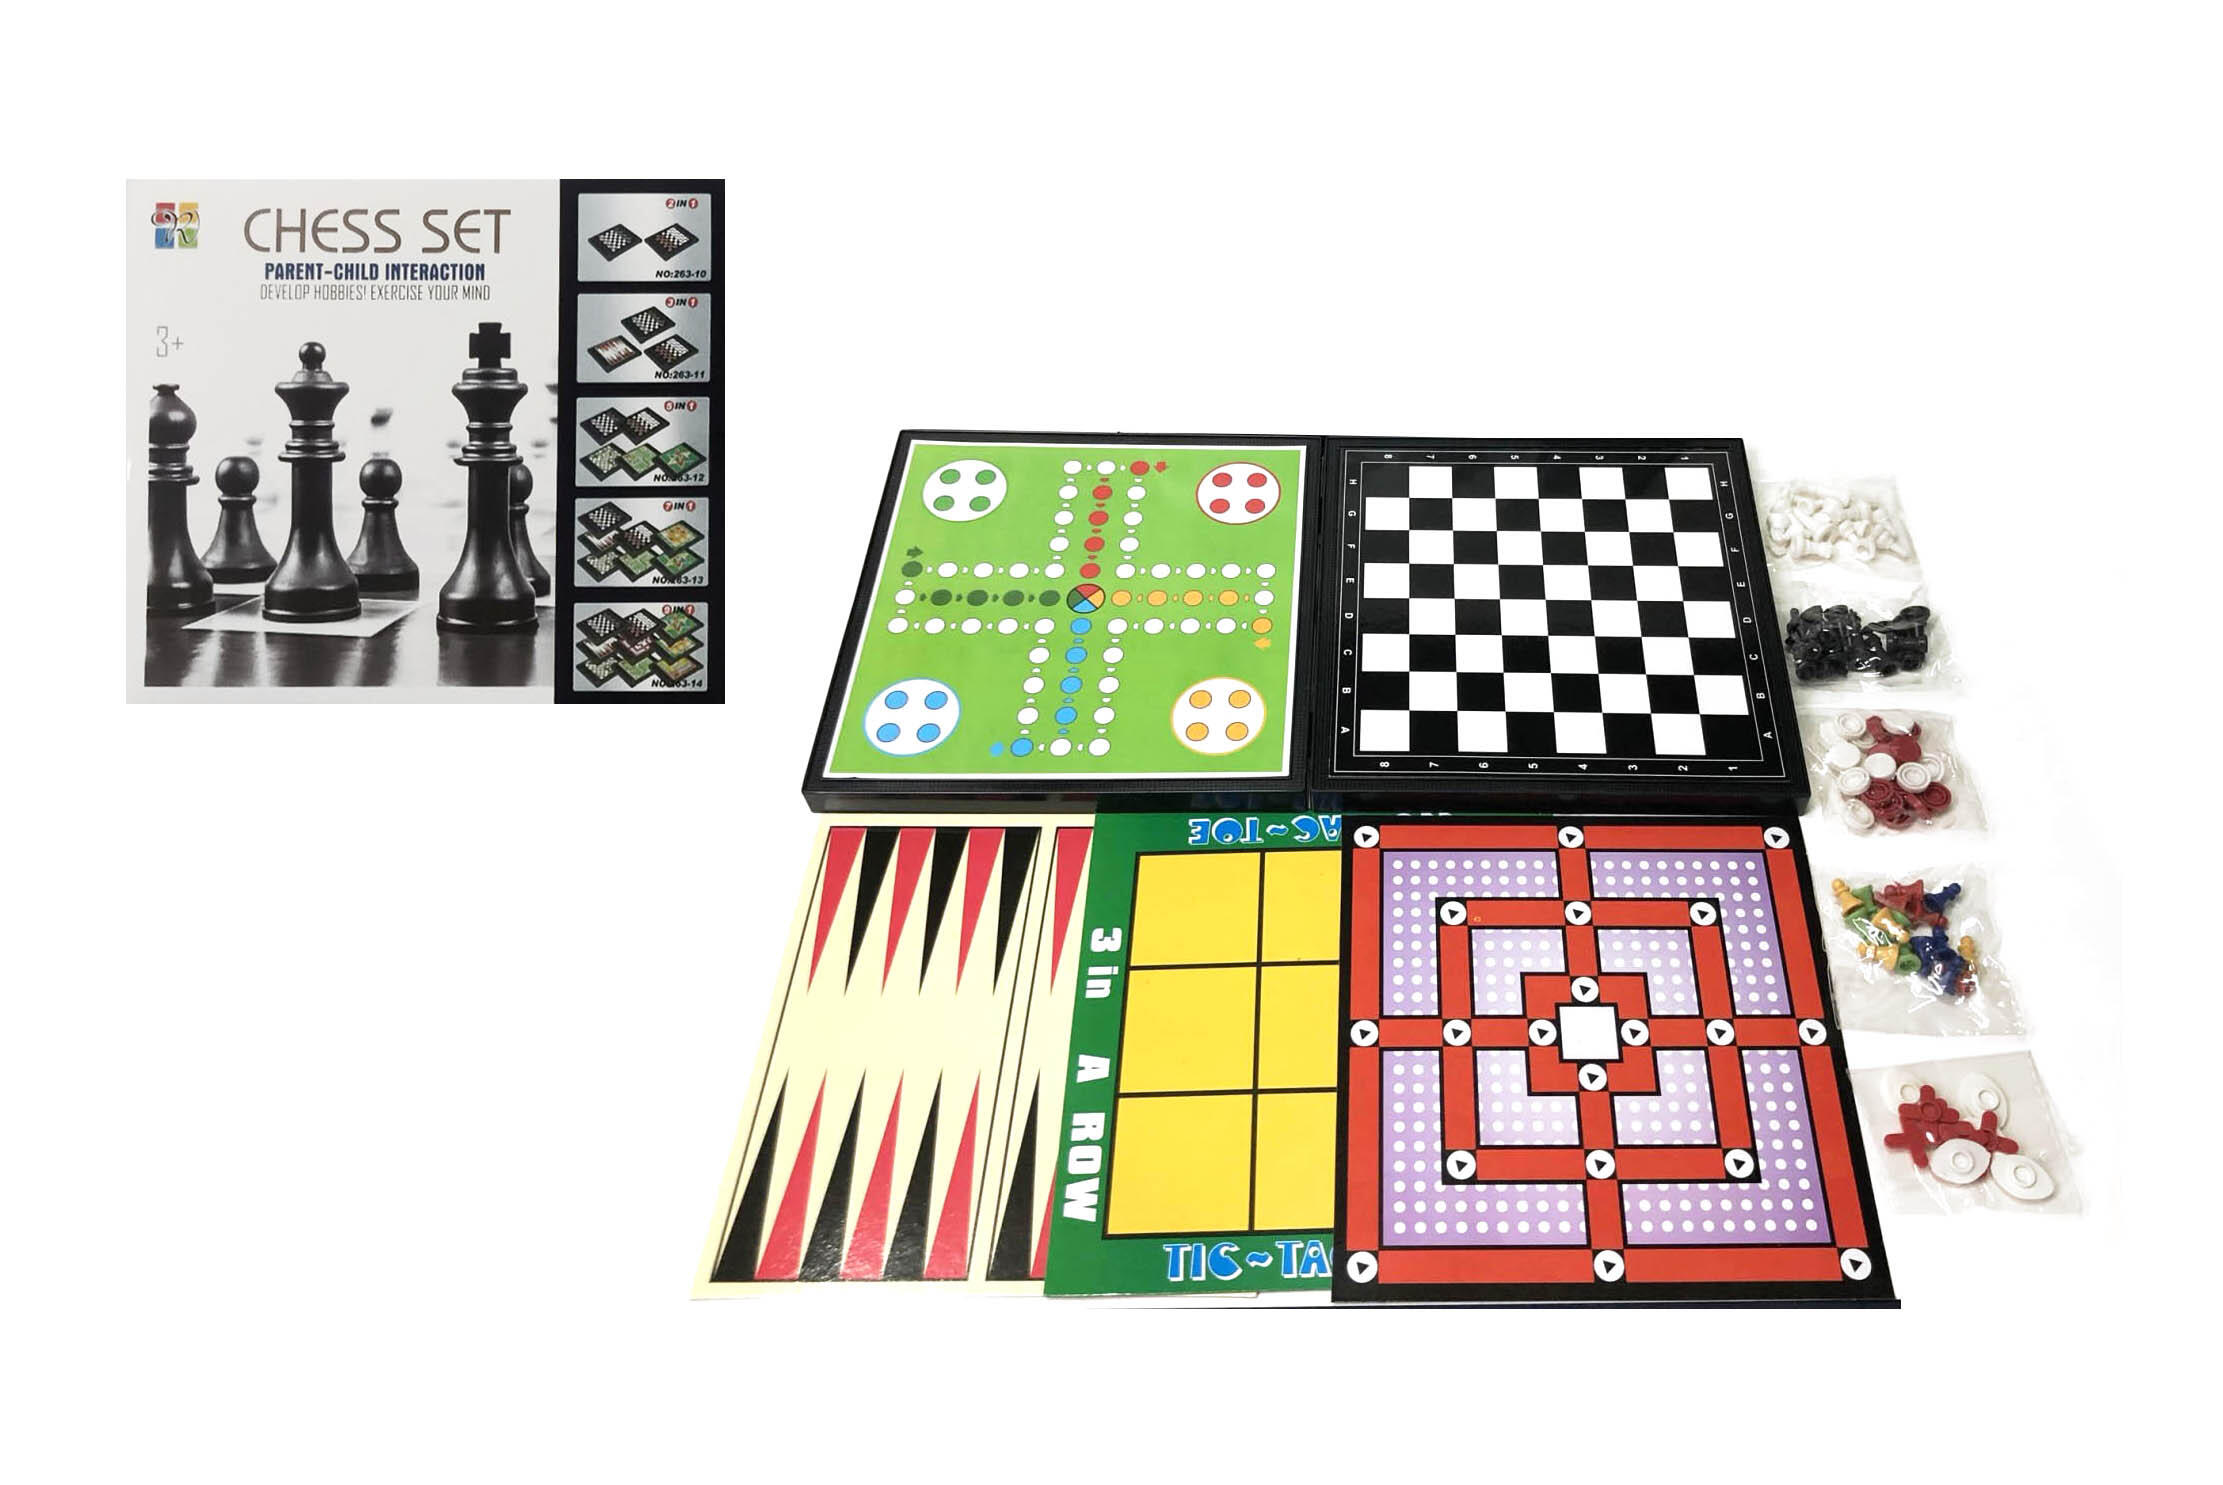 6 IN 1 CHESS GAME